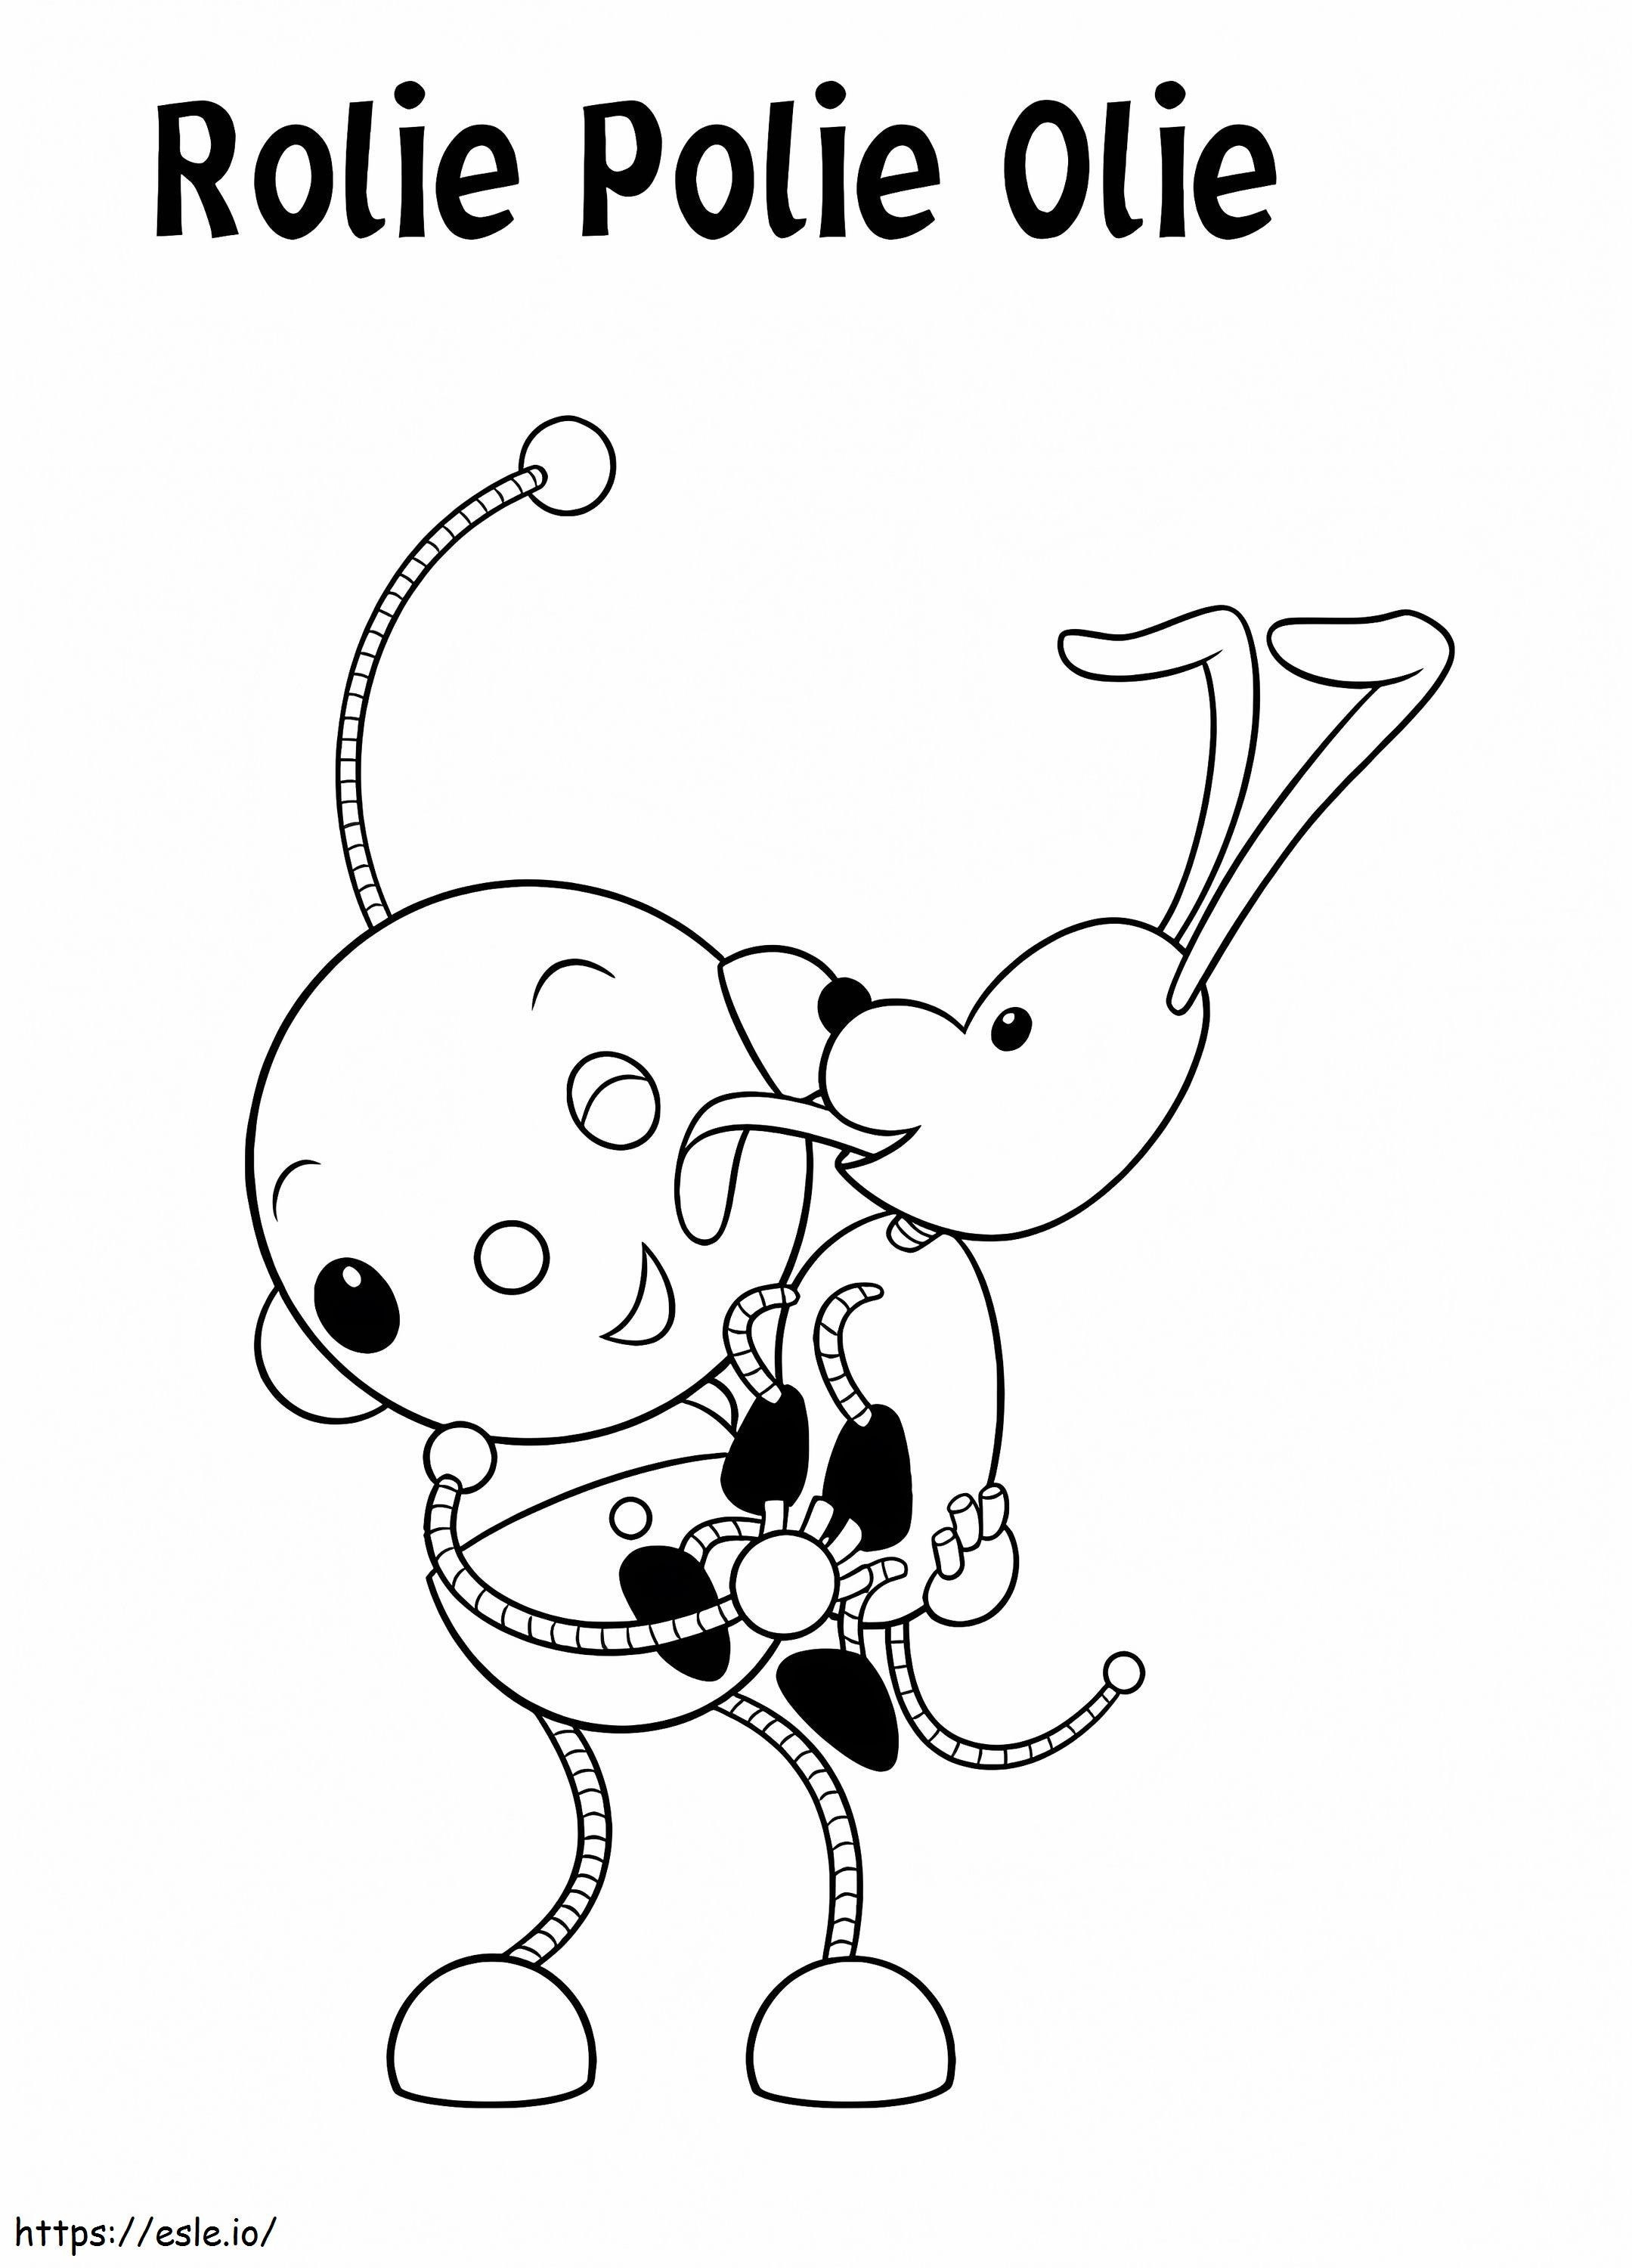 Happy Spot And Olie Polie coloring page